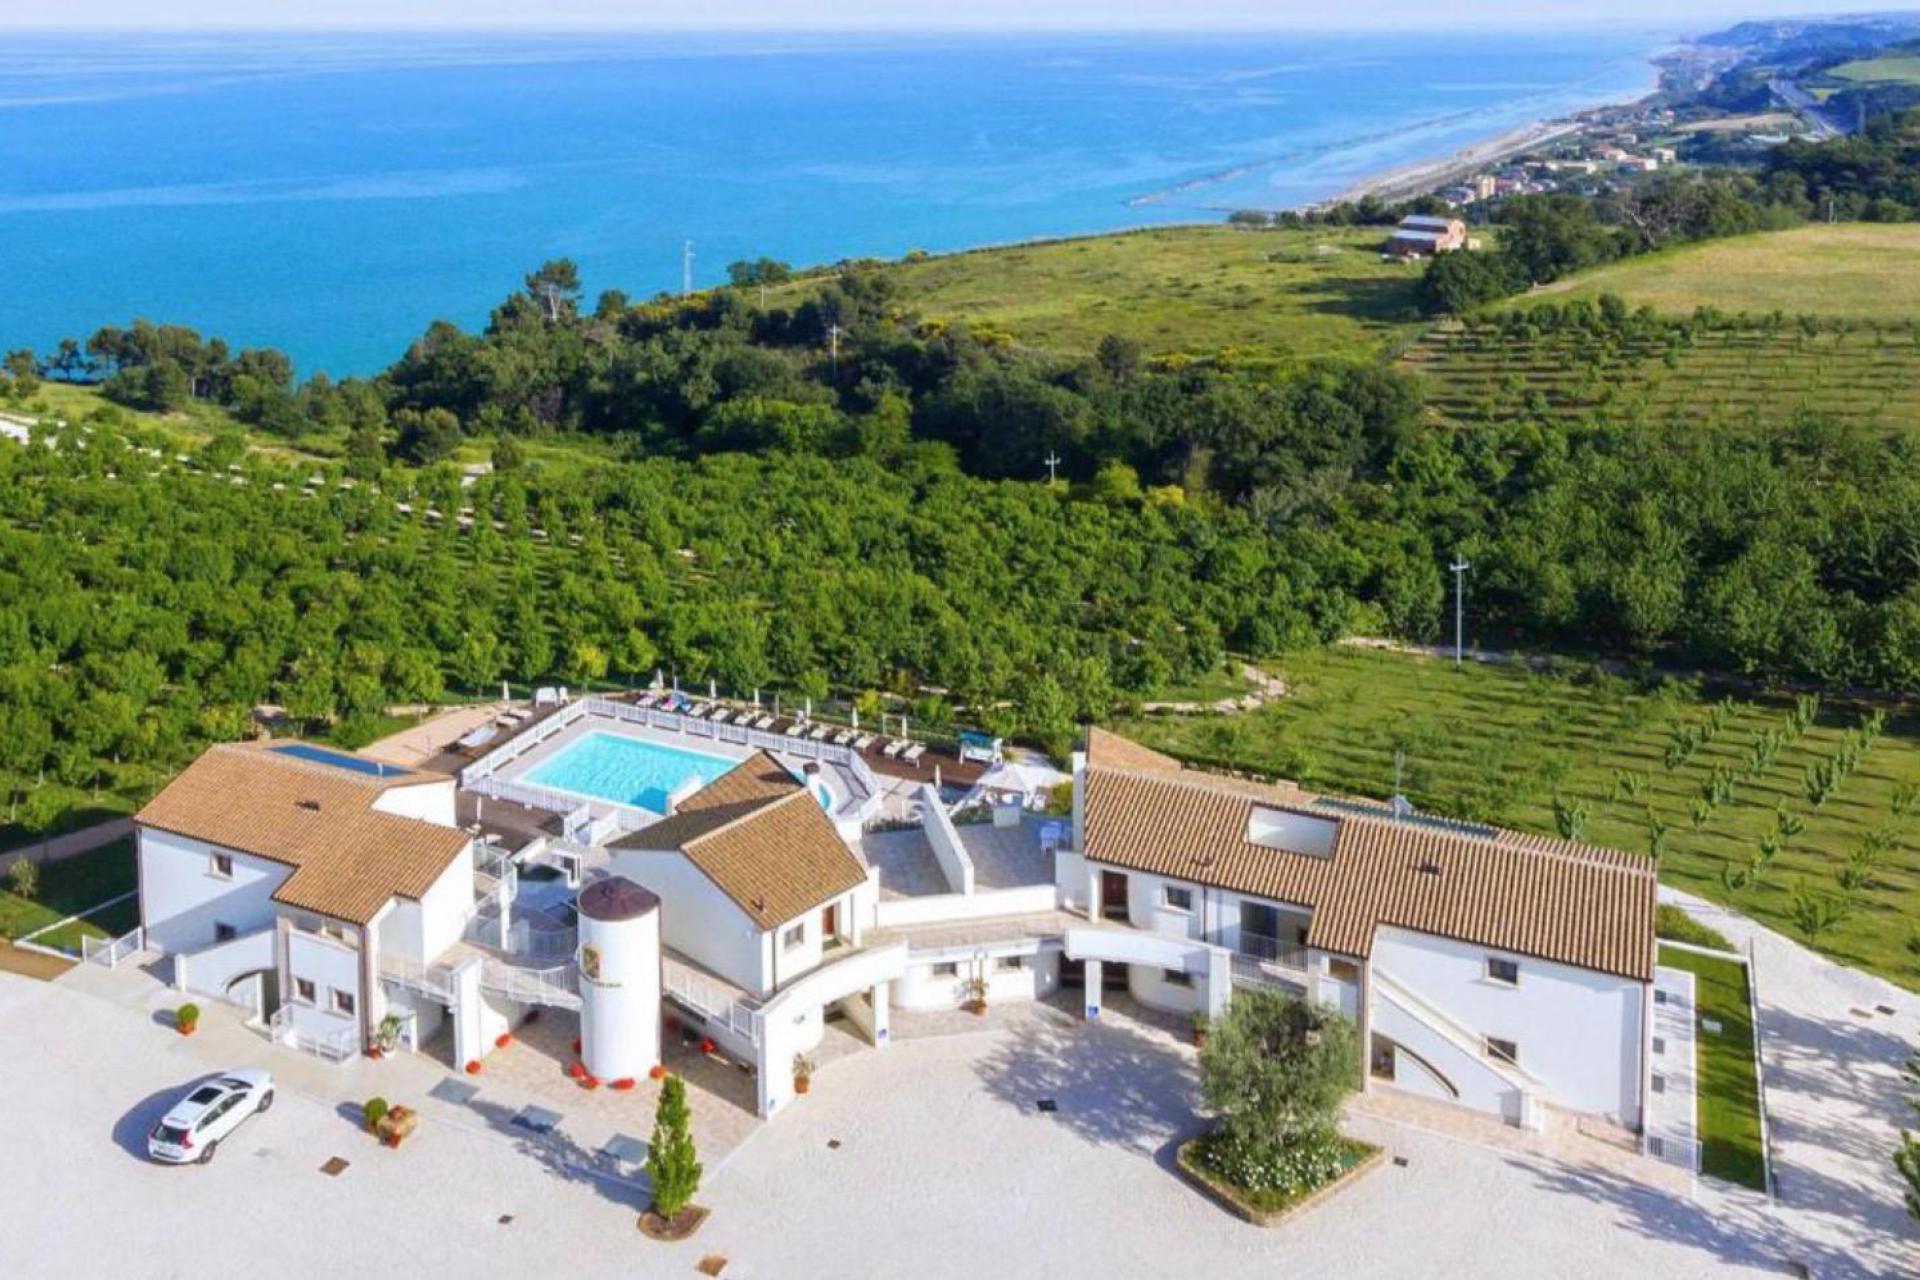 Family-friendly agriturismo with stunning sea views